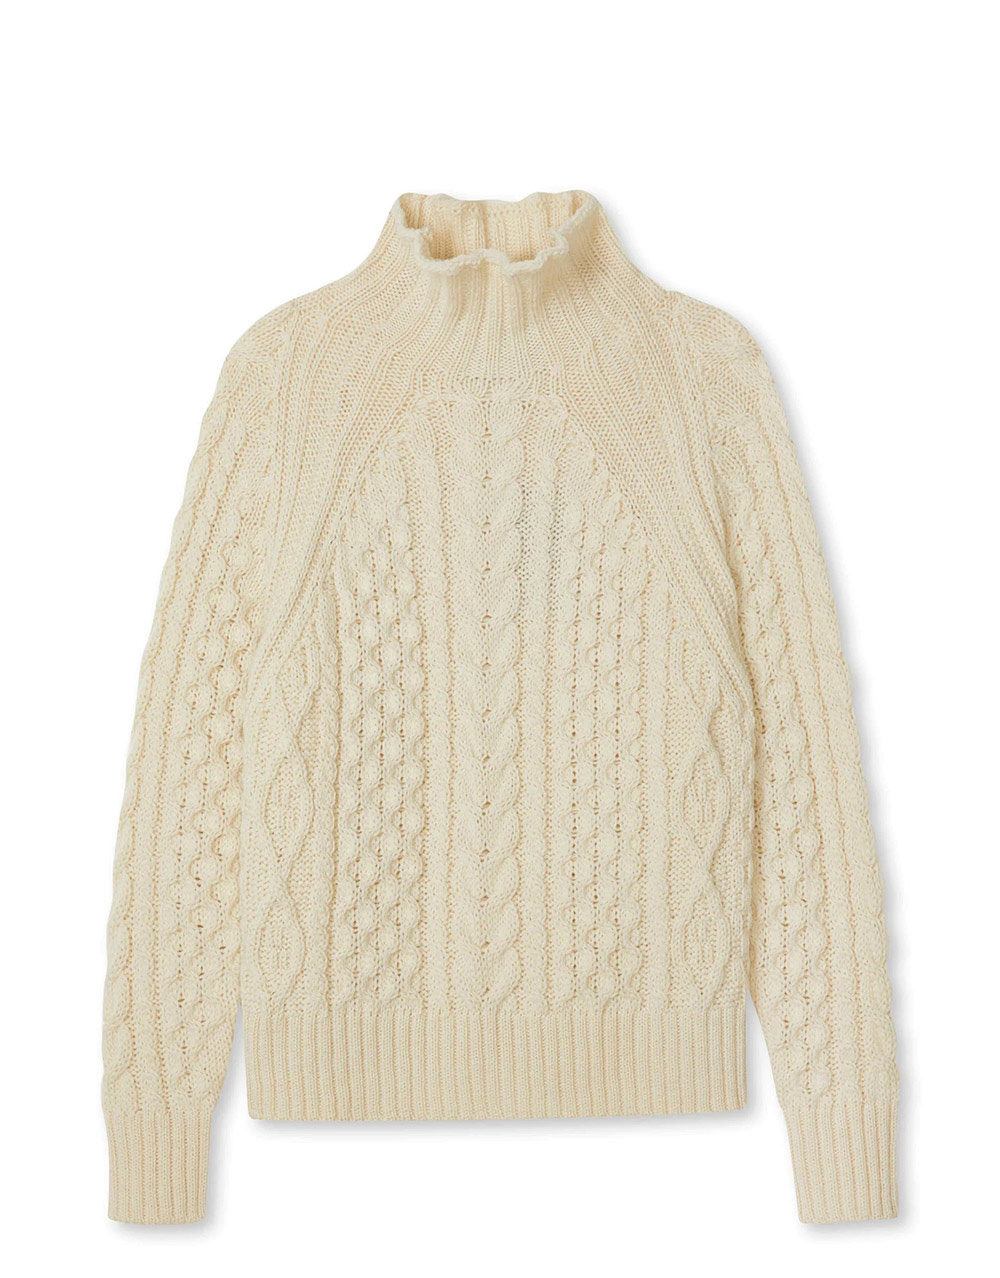 PEREGRINE – Sophie Cable Jumper